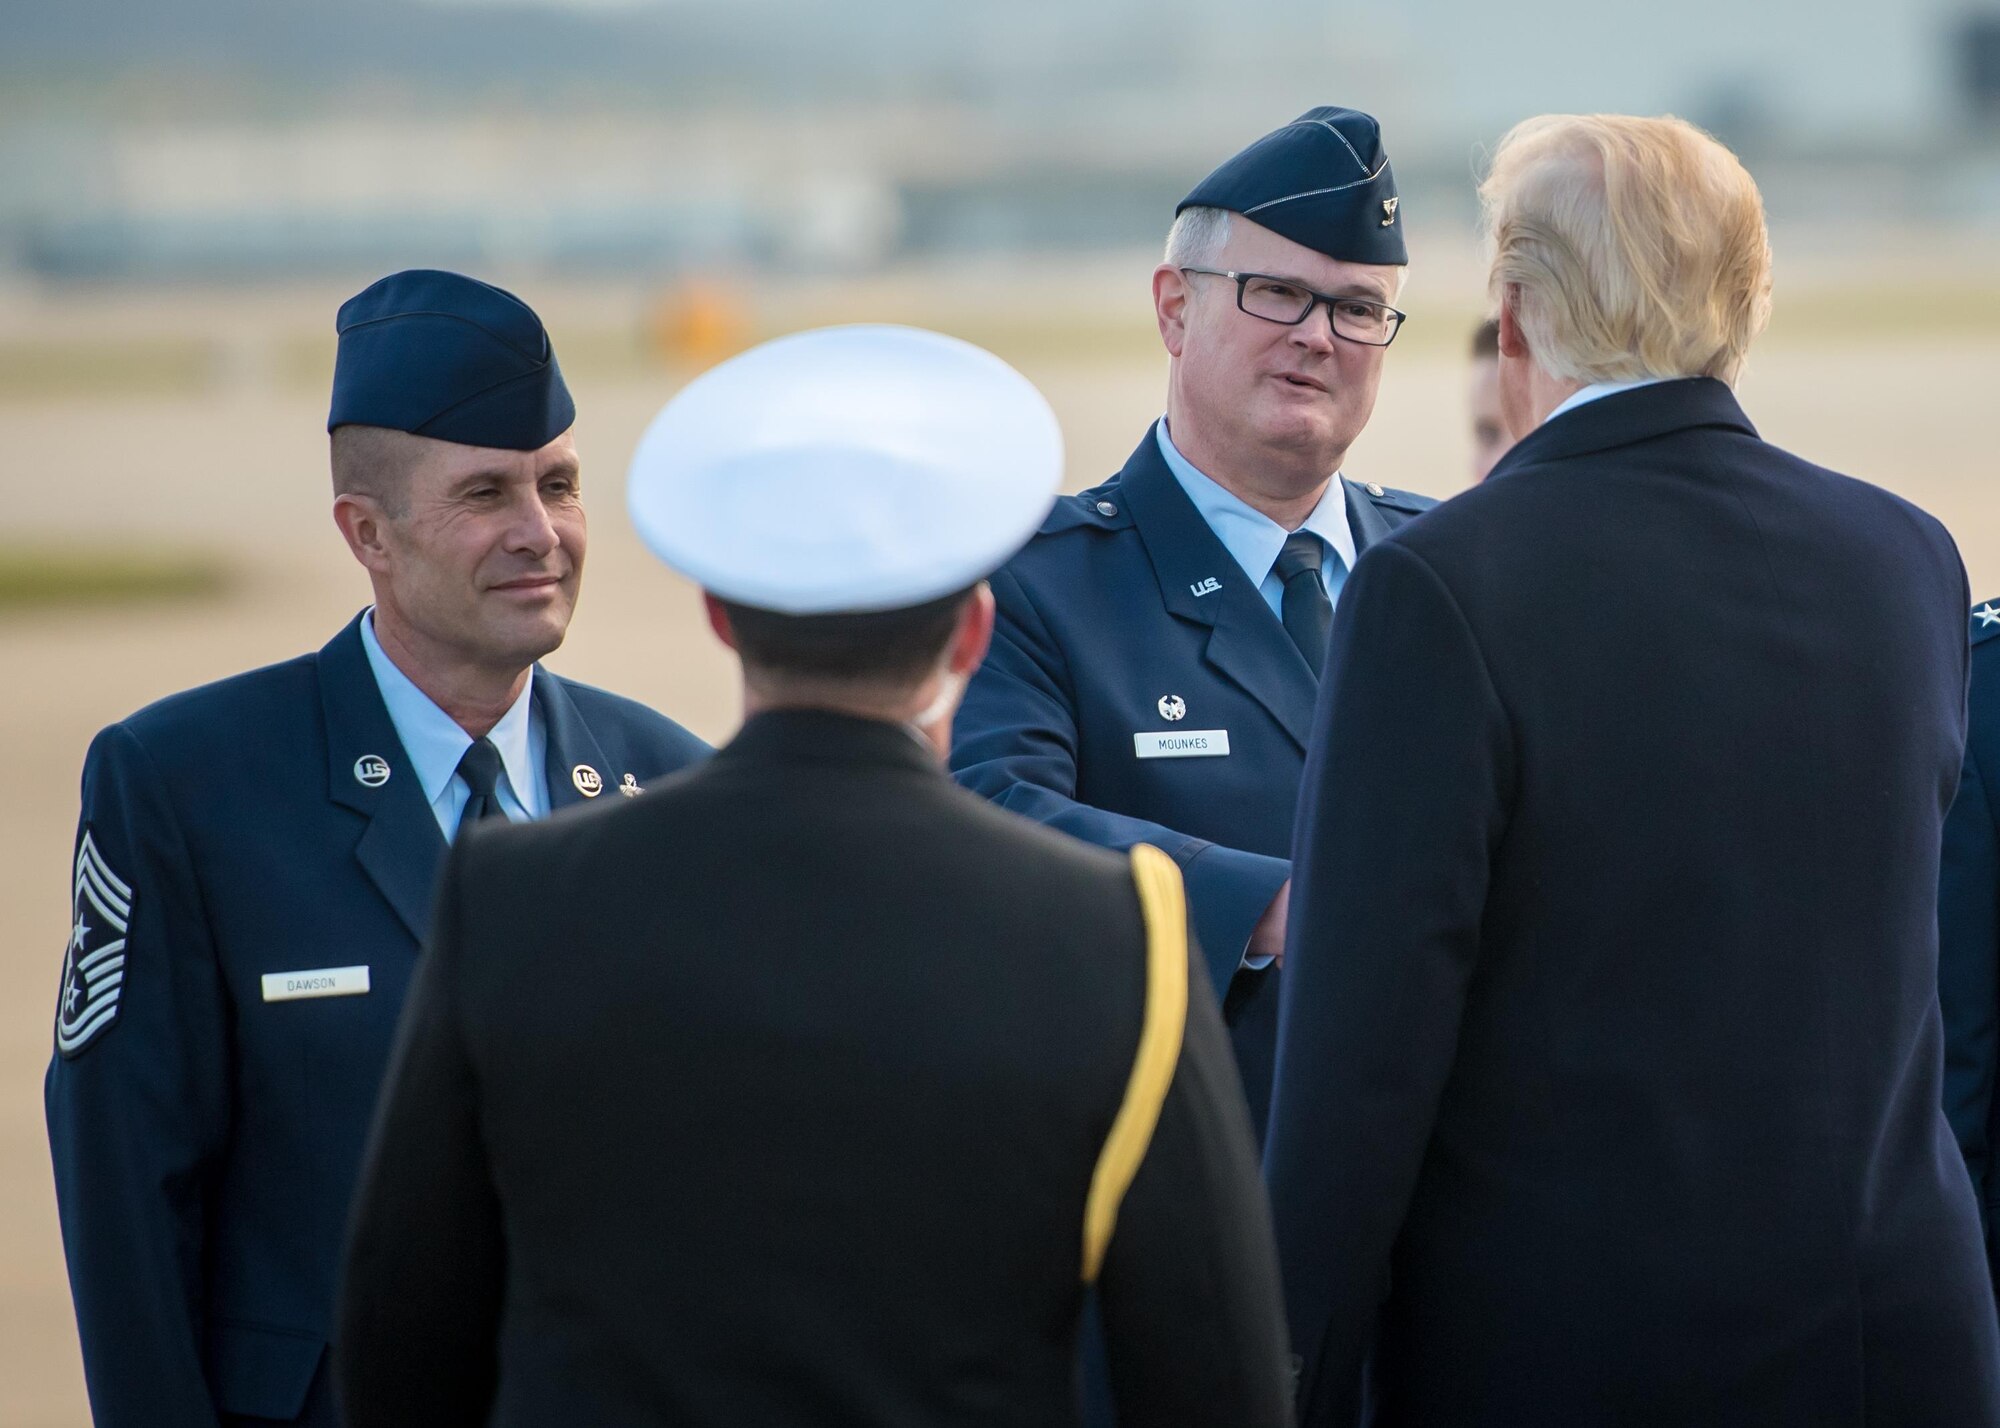 Col. David Mounkes (second from right), commander of the 123rd Airlift Wing, and Chief Master Sgt. Ray Dawson (left), wing command chief, greet President Donald Trump as he arrives at the Kentucky Air National Guard Base in Louisville, Ky., March 20, 2017. Trump was in Louisville to attend a rally at the Kentucky Exposition Center. (U.S. Air National Guard photo by Master Sgt. Phil Speck)